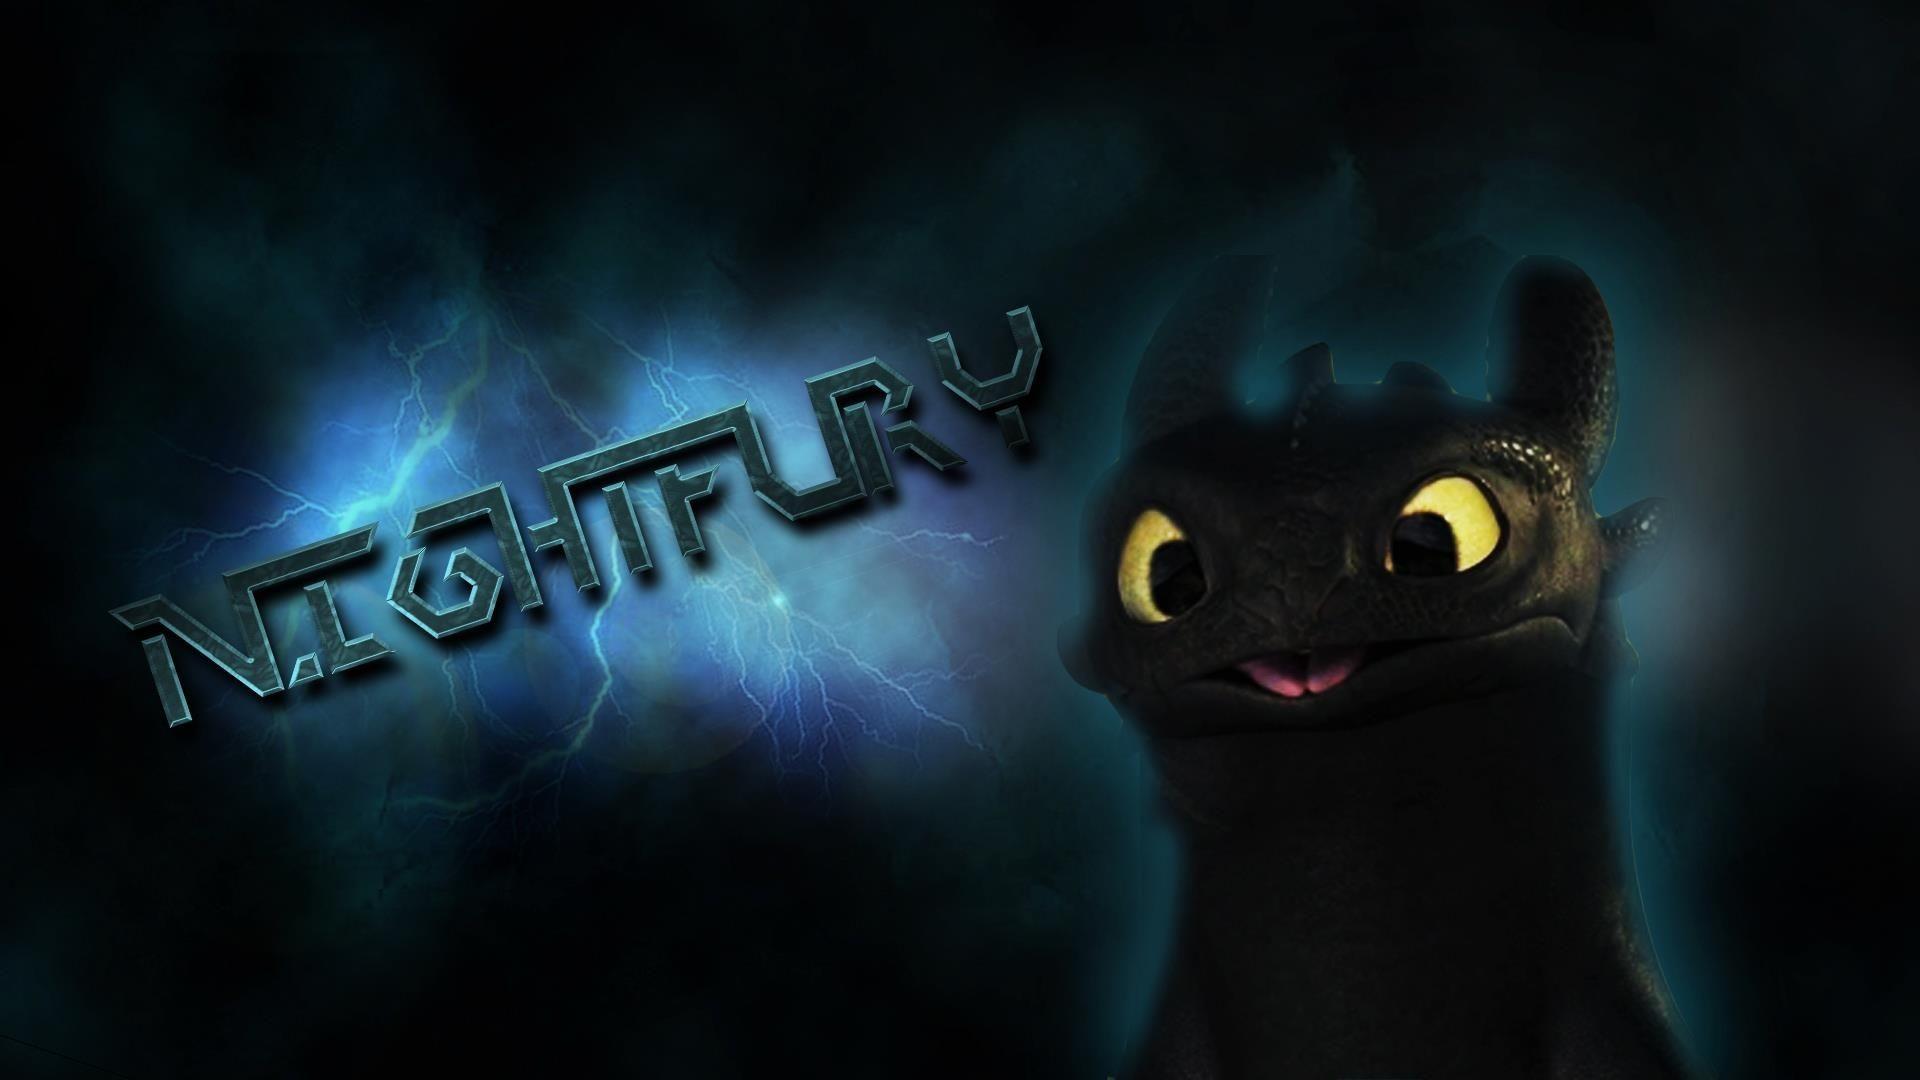 Toothless Night fury wallpaper on wallpaperplay 3 HD